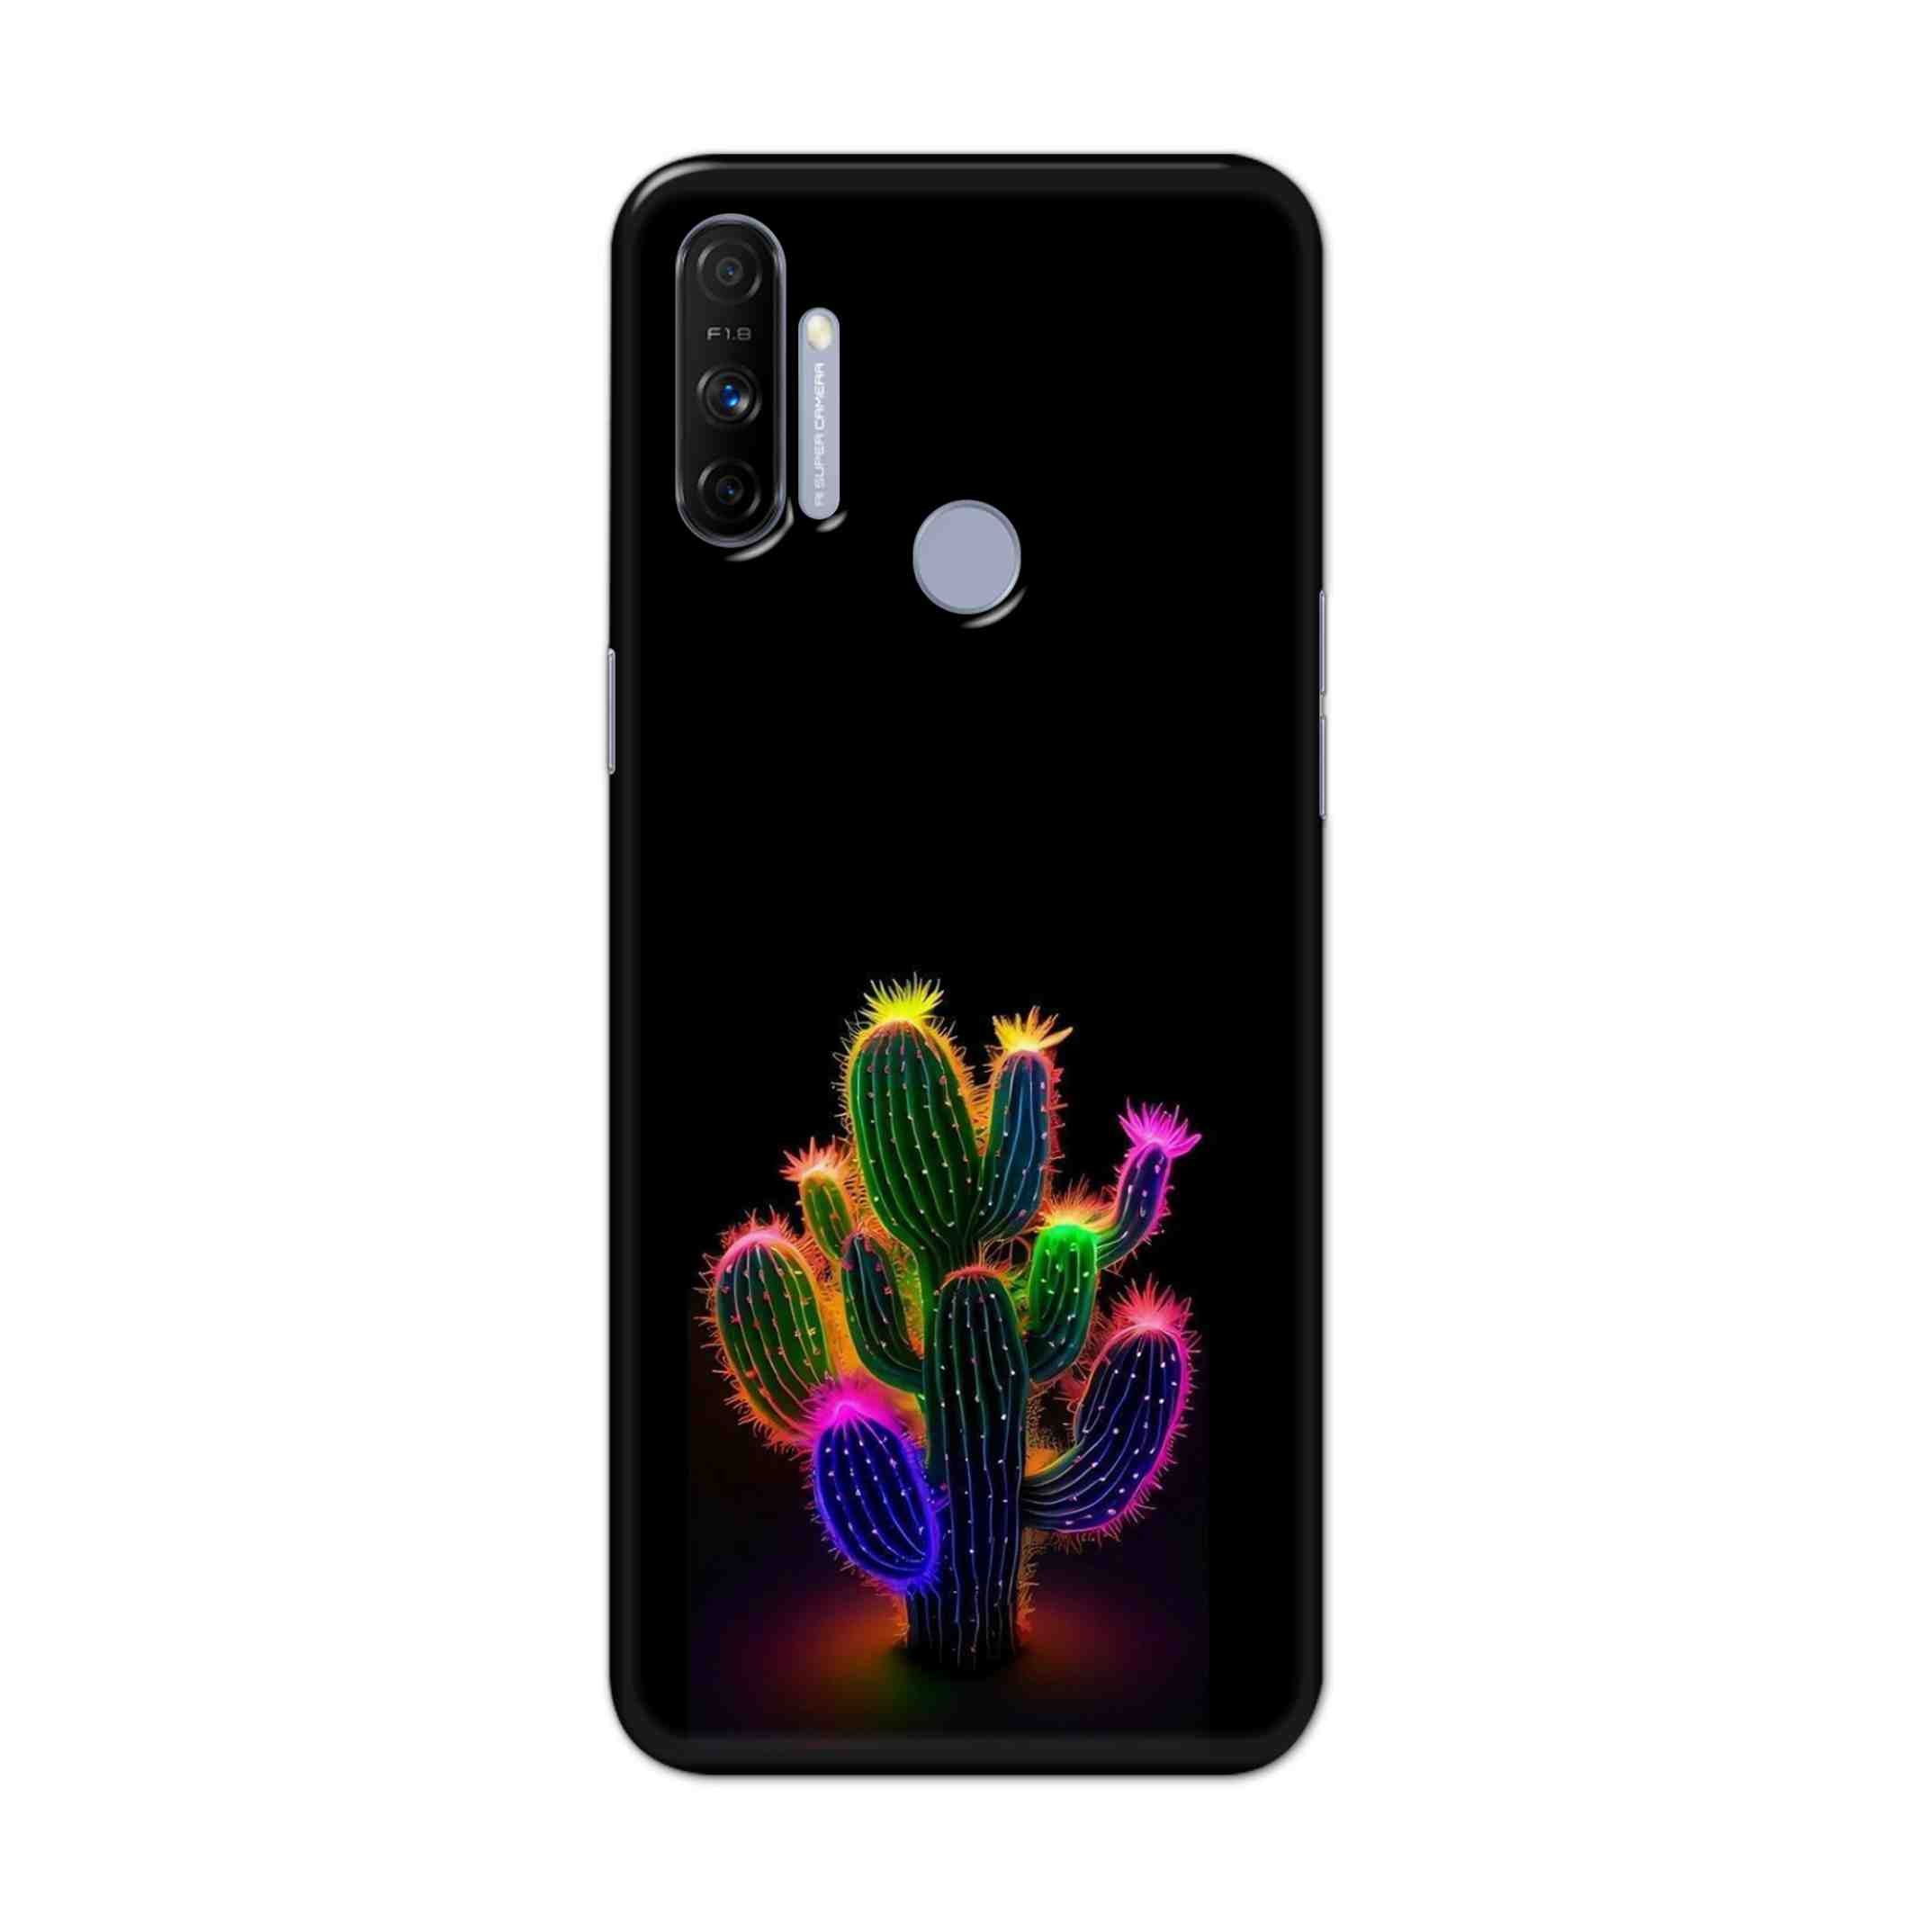 Buy Neon Flower Hard Back Mobile Phone Case Cover For Realme Narzo 20A Online